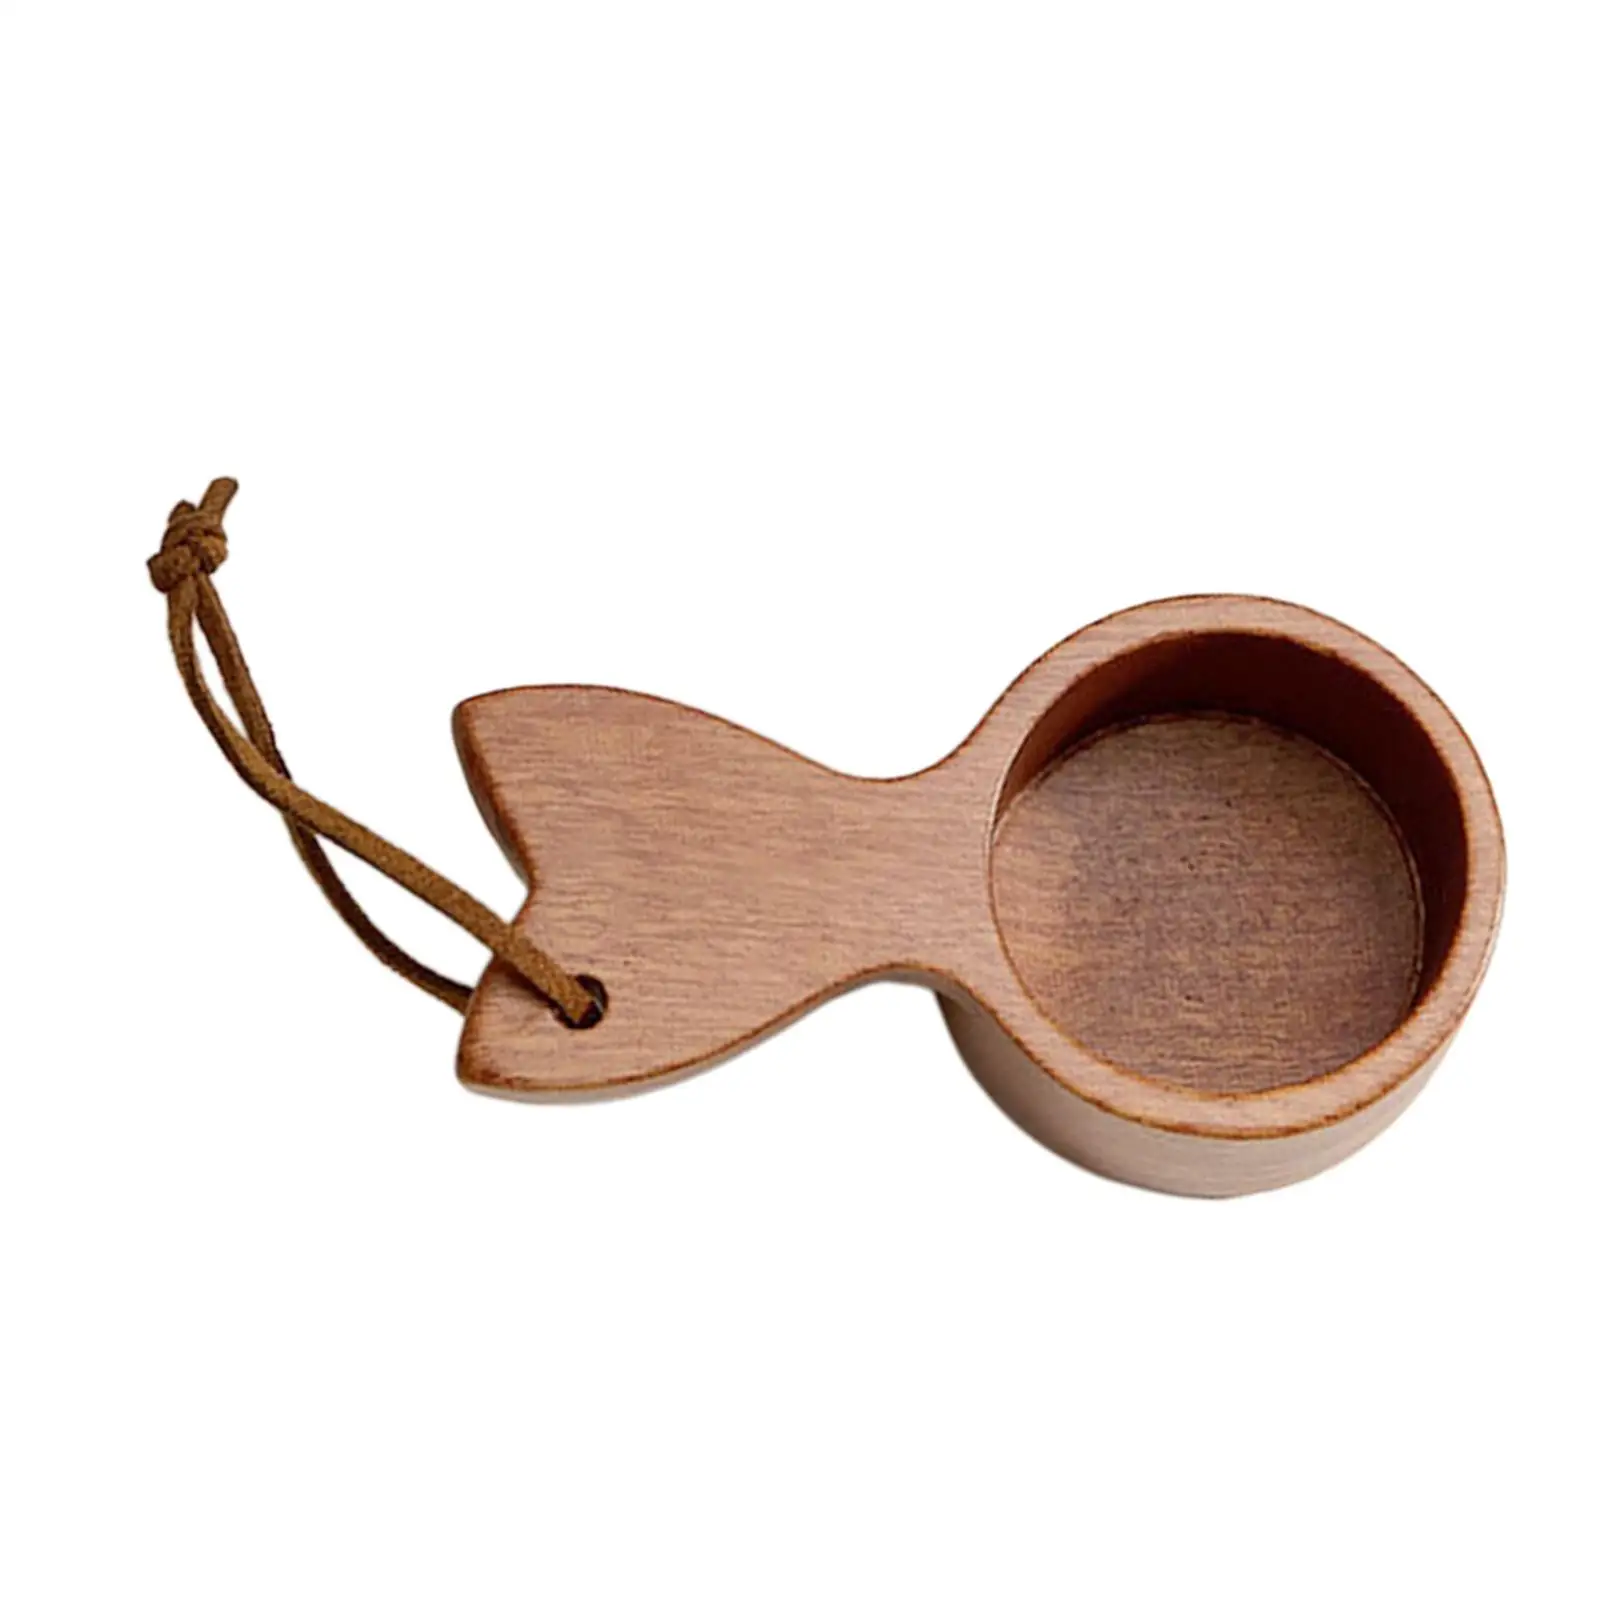 Wooden Coffee Measure Spoon Small Wall Mount Coffee Bean Measuring Spoon Coffee Bean for Camping Gadget